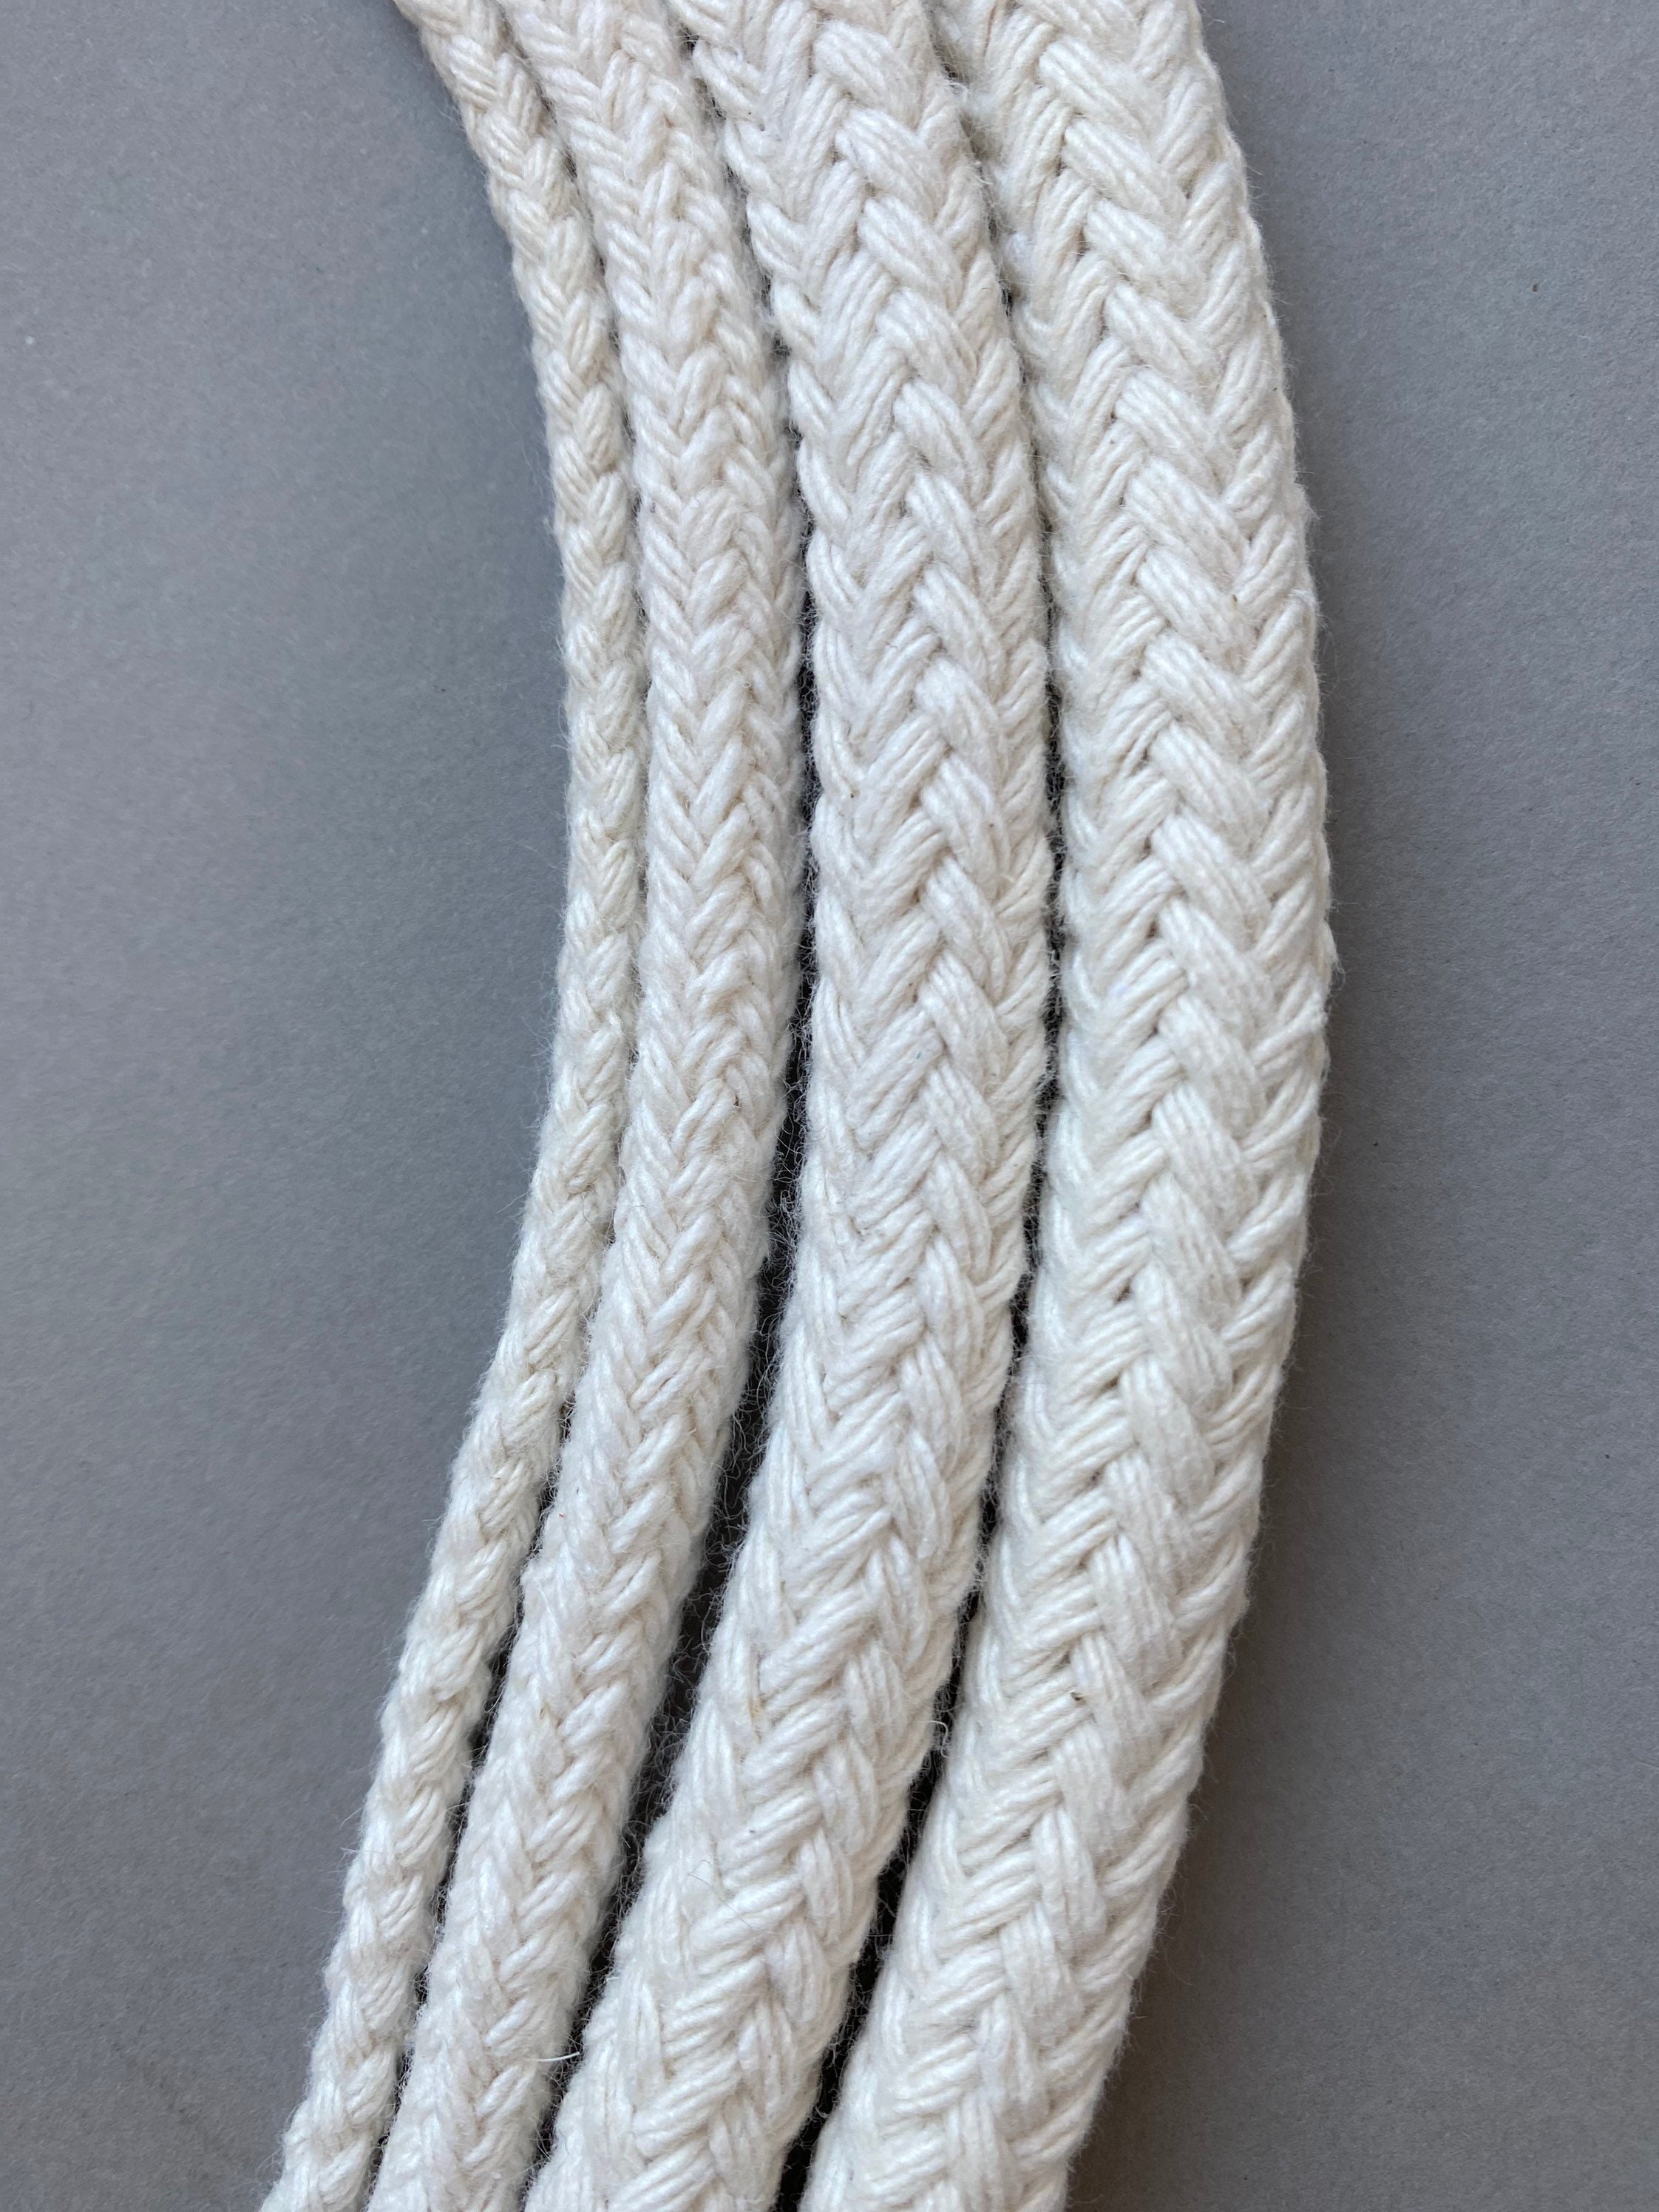 Buy Braided Cotton Rope Macramé Crafting Cord off White Cotton Rope Macramé  Supplies Fiber Art Cotton DIY Rope Online in India 